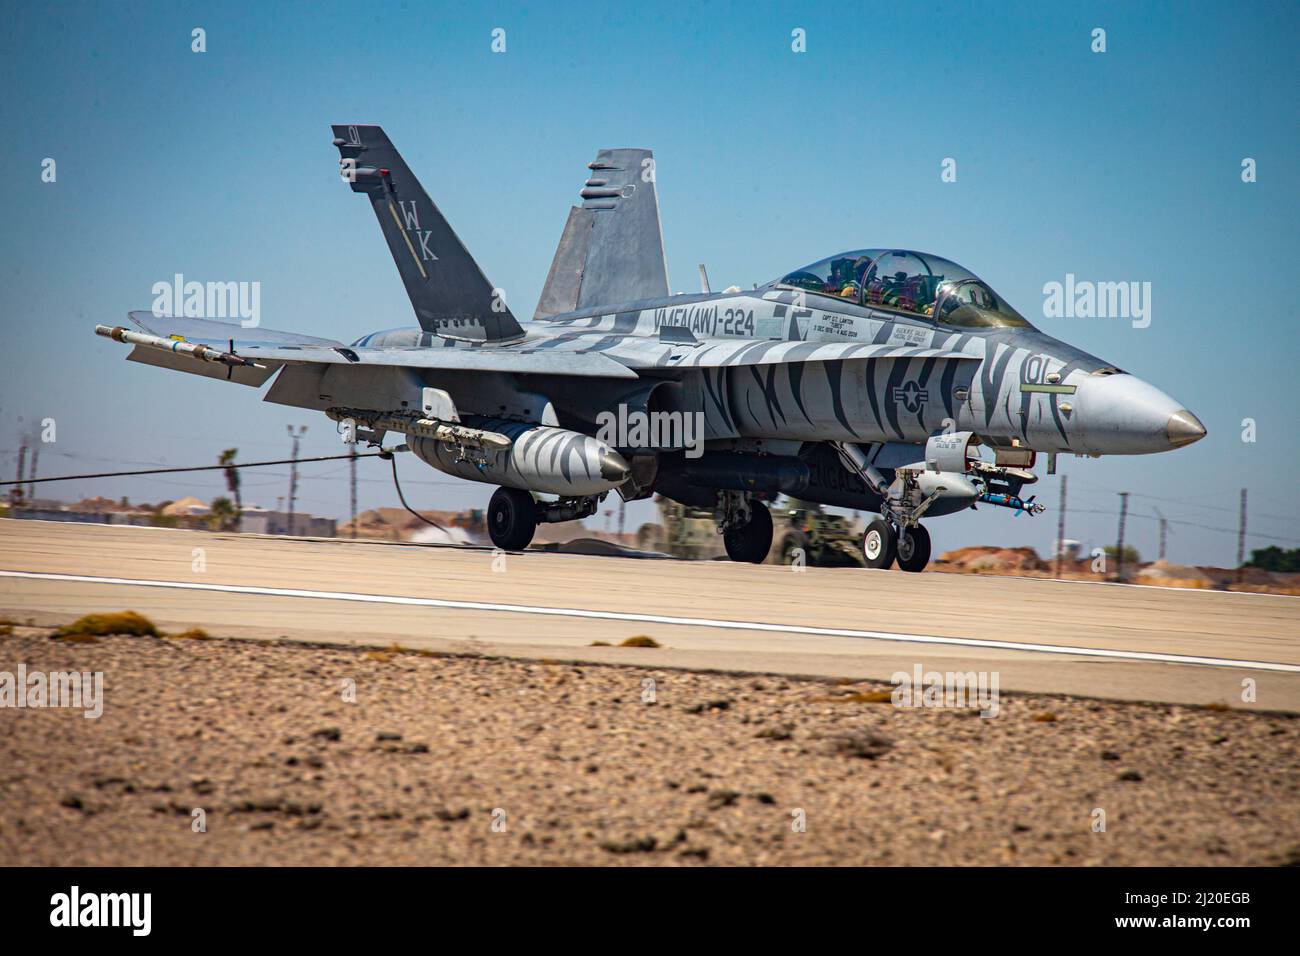 A U.S. Marine Corps F/A-18 Hornet latches onto an emergency arresting gear system, during an exercise as part of Weapons and Tactics Instructor (WTI) course 2-22, at Marine Corps Air Station Yuma, Arizona, March 24, 2022. WTI is a seven-week training event hosted by MAWTS-1, providing standardized advanced tactical training and certification of unit instructor qualifications to support Marine aviation training and readiness, and assists in developing and employing aviation weapons and tactics. (U.S. Marine Corps photo by Lance Cpl. Symira Bostic) Stock Photo